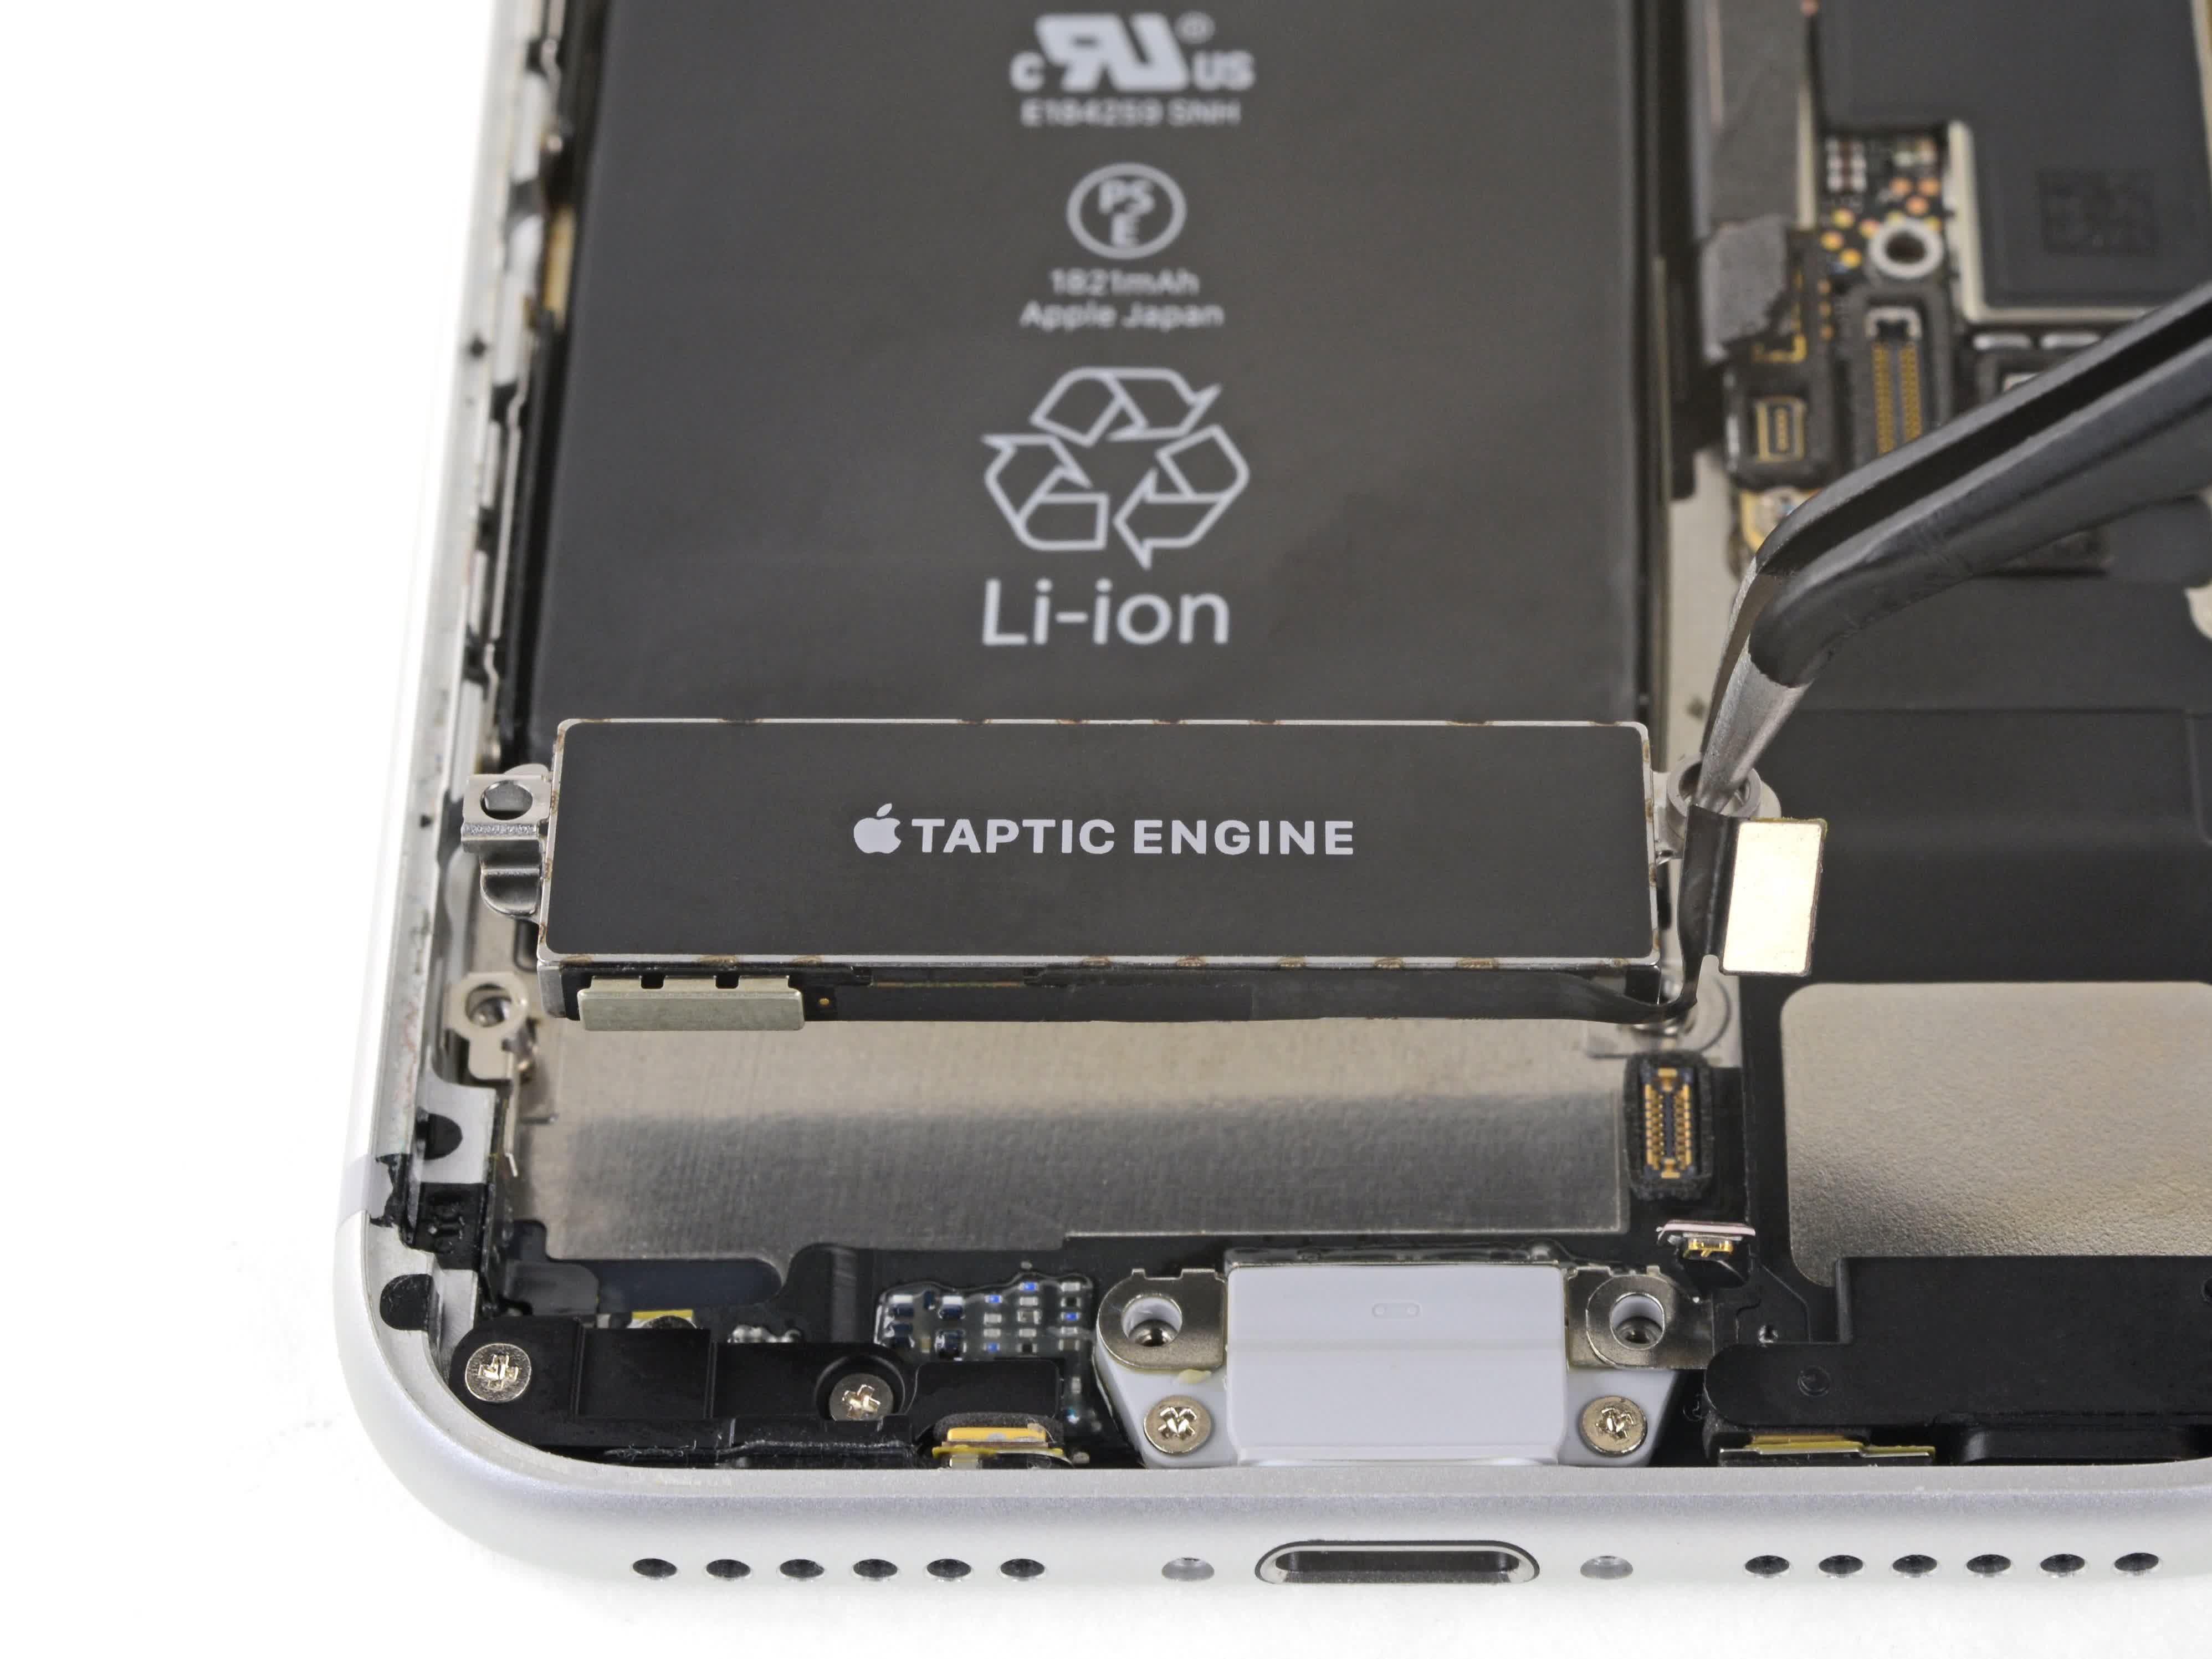 Apple faces new legal action in the UK around iPhone Batterygate